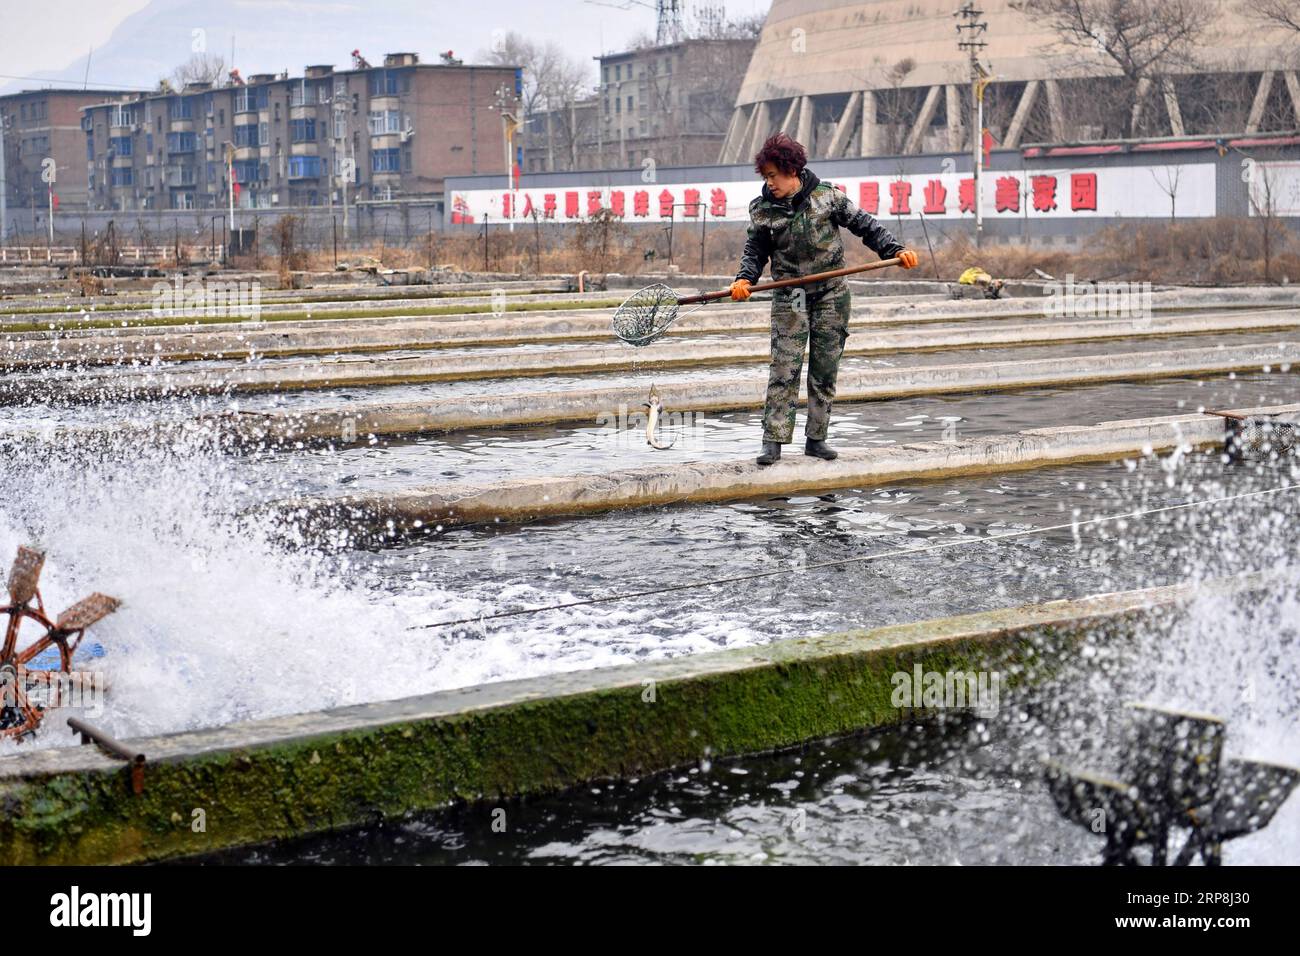 (190307) -- PINGDING, March 7, 2019 -- Villager Kang Ruiqing fishes in a cooperative aqua farm in Podi Village, Niangziguan Town, Pingding County, north China s Shanxi Province, on Feb. 26, 2019. The women of Niangziguan Town have played a vital role in developing local tourism industry under a poverty alleviation campaign. Taking tourist experience into consideration, they have made thorough plans to improve key service factors such as routes, catering and accommodation. In turn, the number of tourists have increased. All residents in Niangziguan Town have been helped out of poverty by the en Stock Photo